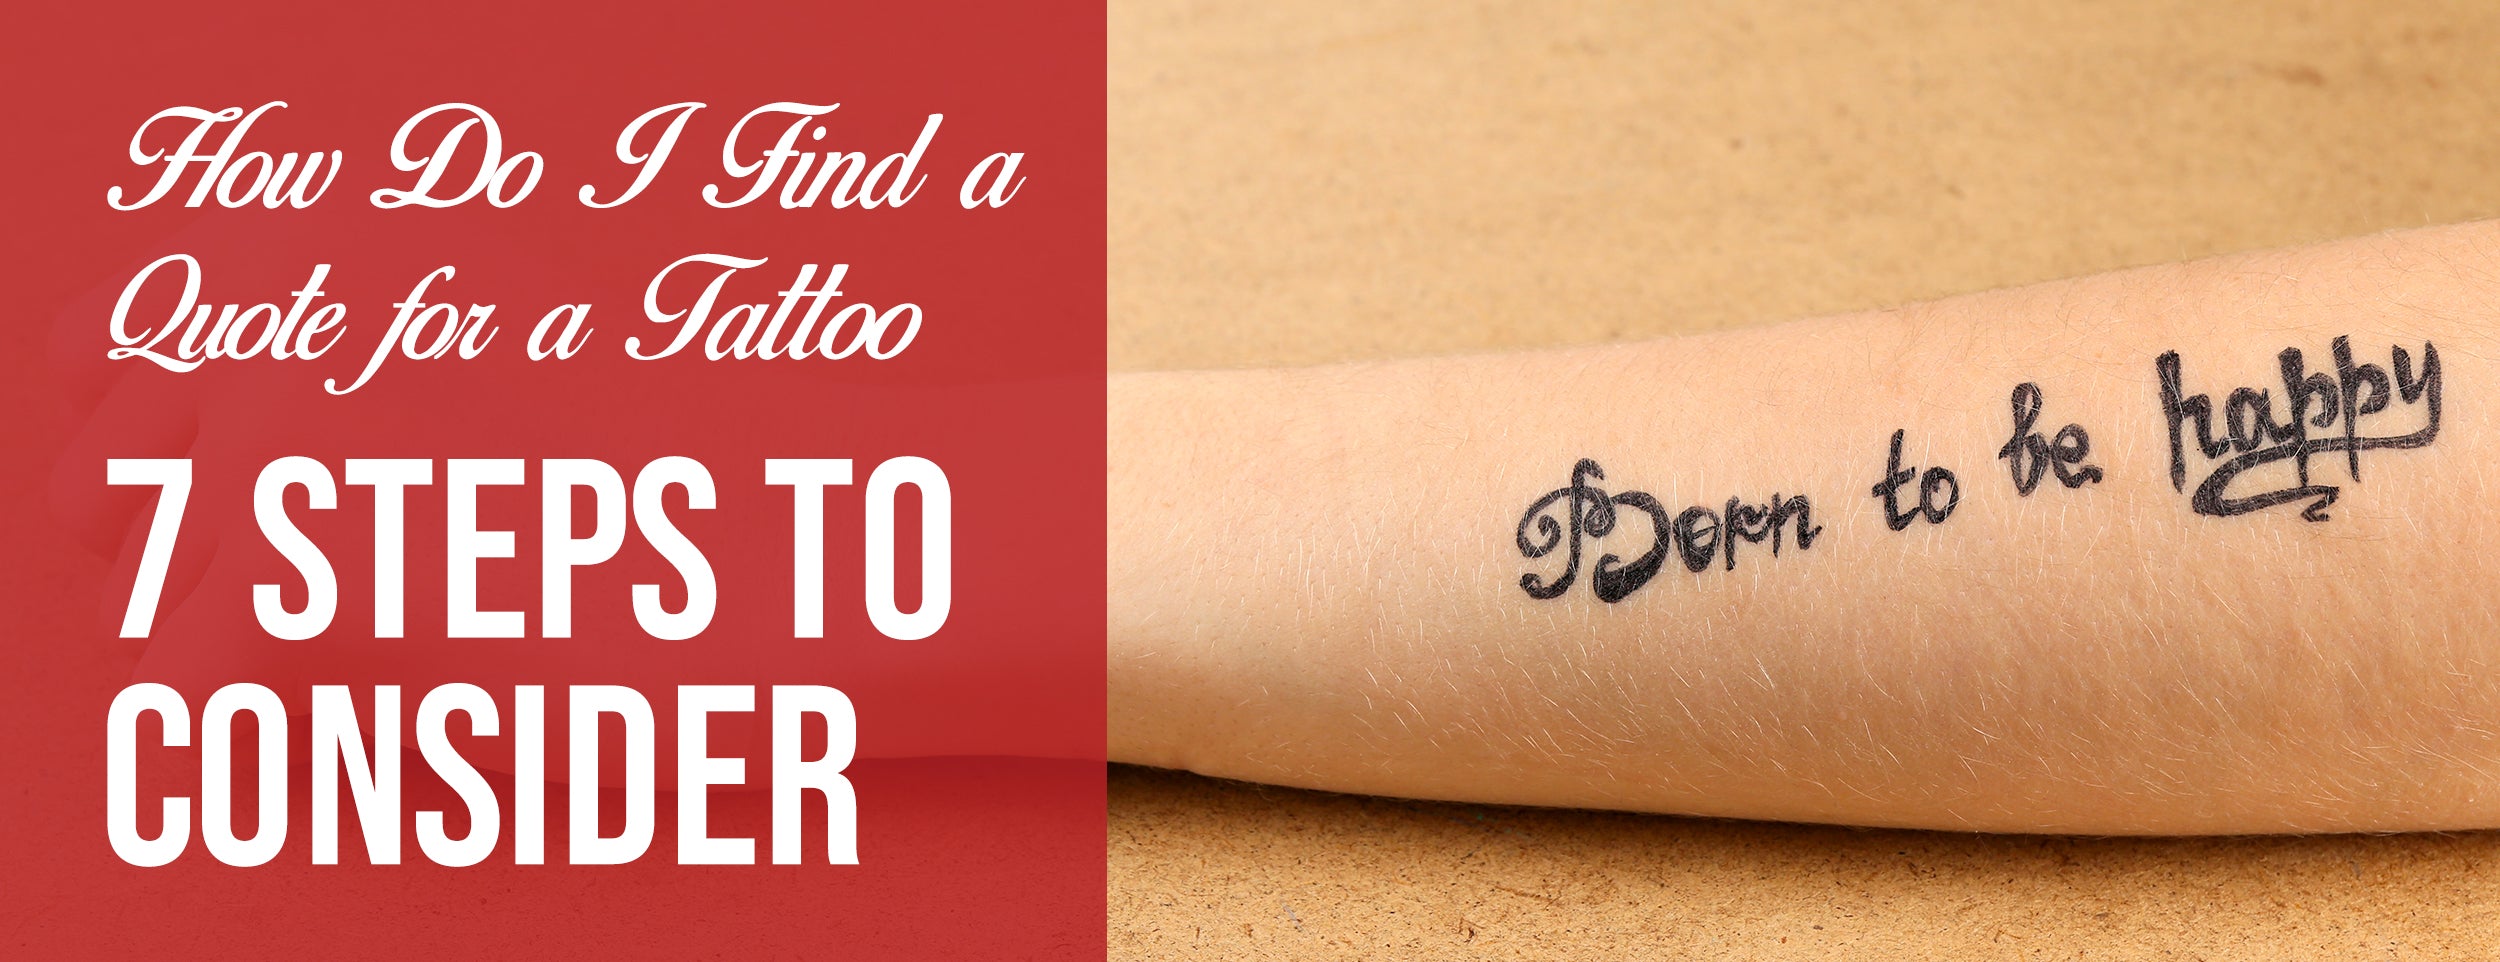 Laser Tattoo Removal: 28 Hot Questions Answered | 7 Derma